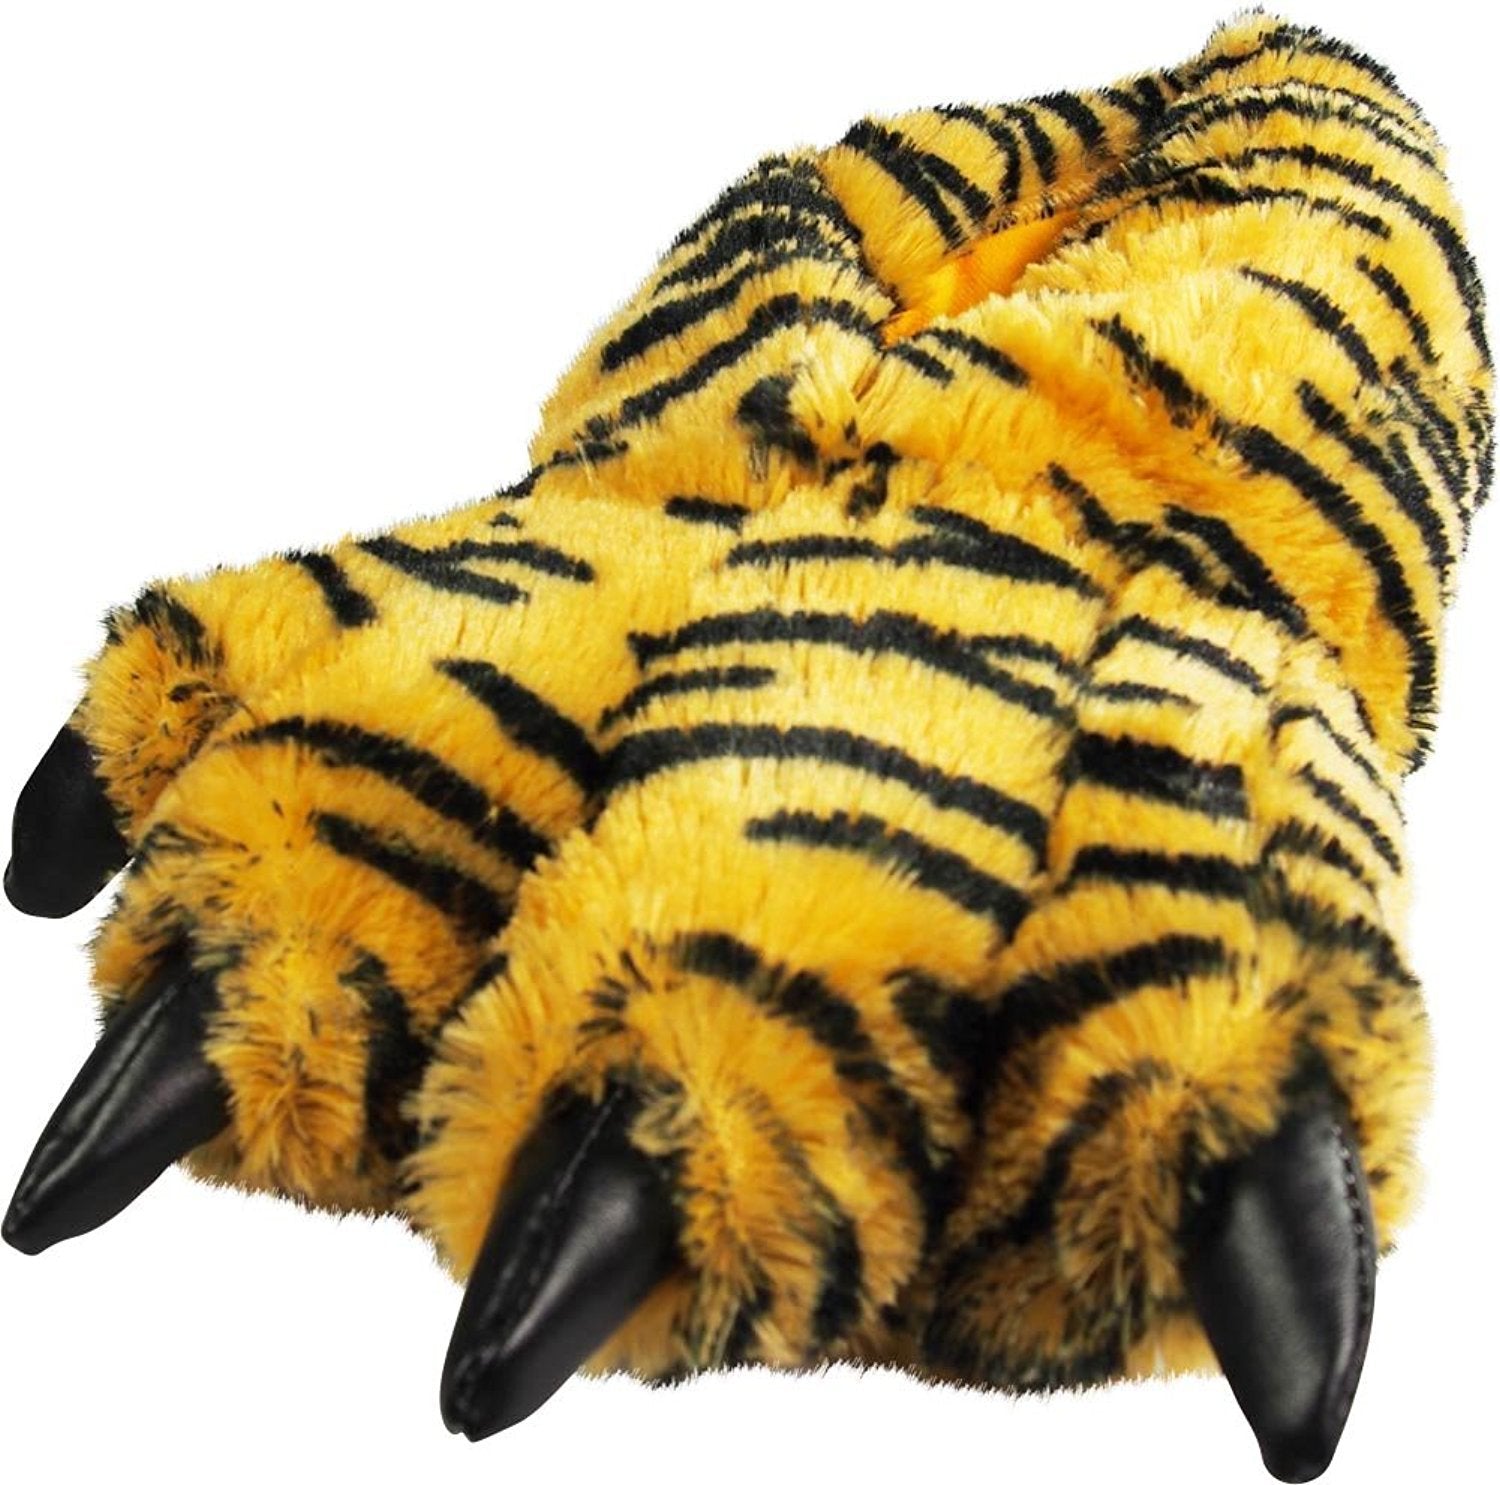 Amazon.com | Fuzzy Winter Animal Tiger Slippers for Men Women Adult and Kids,  Novelty Slippers for Halloween Christmas(7-9, White Tiger) | Slippers